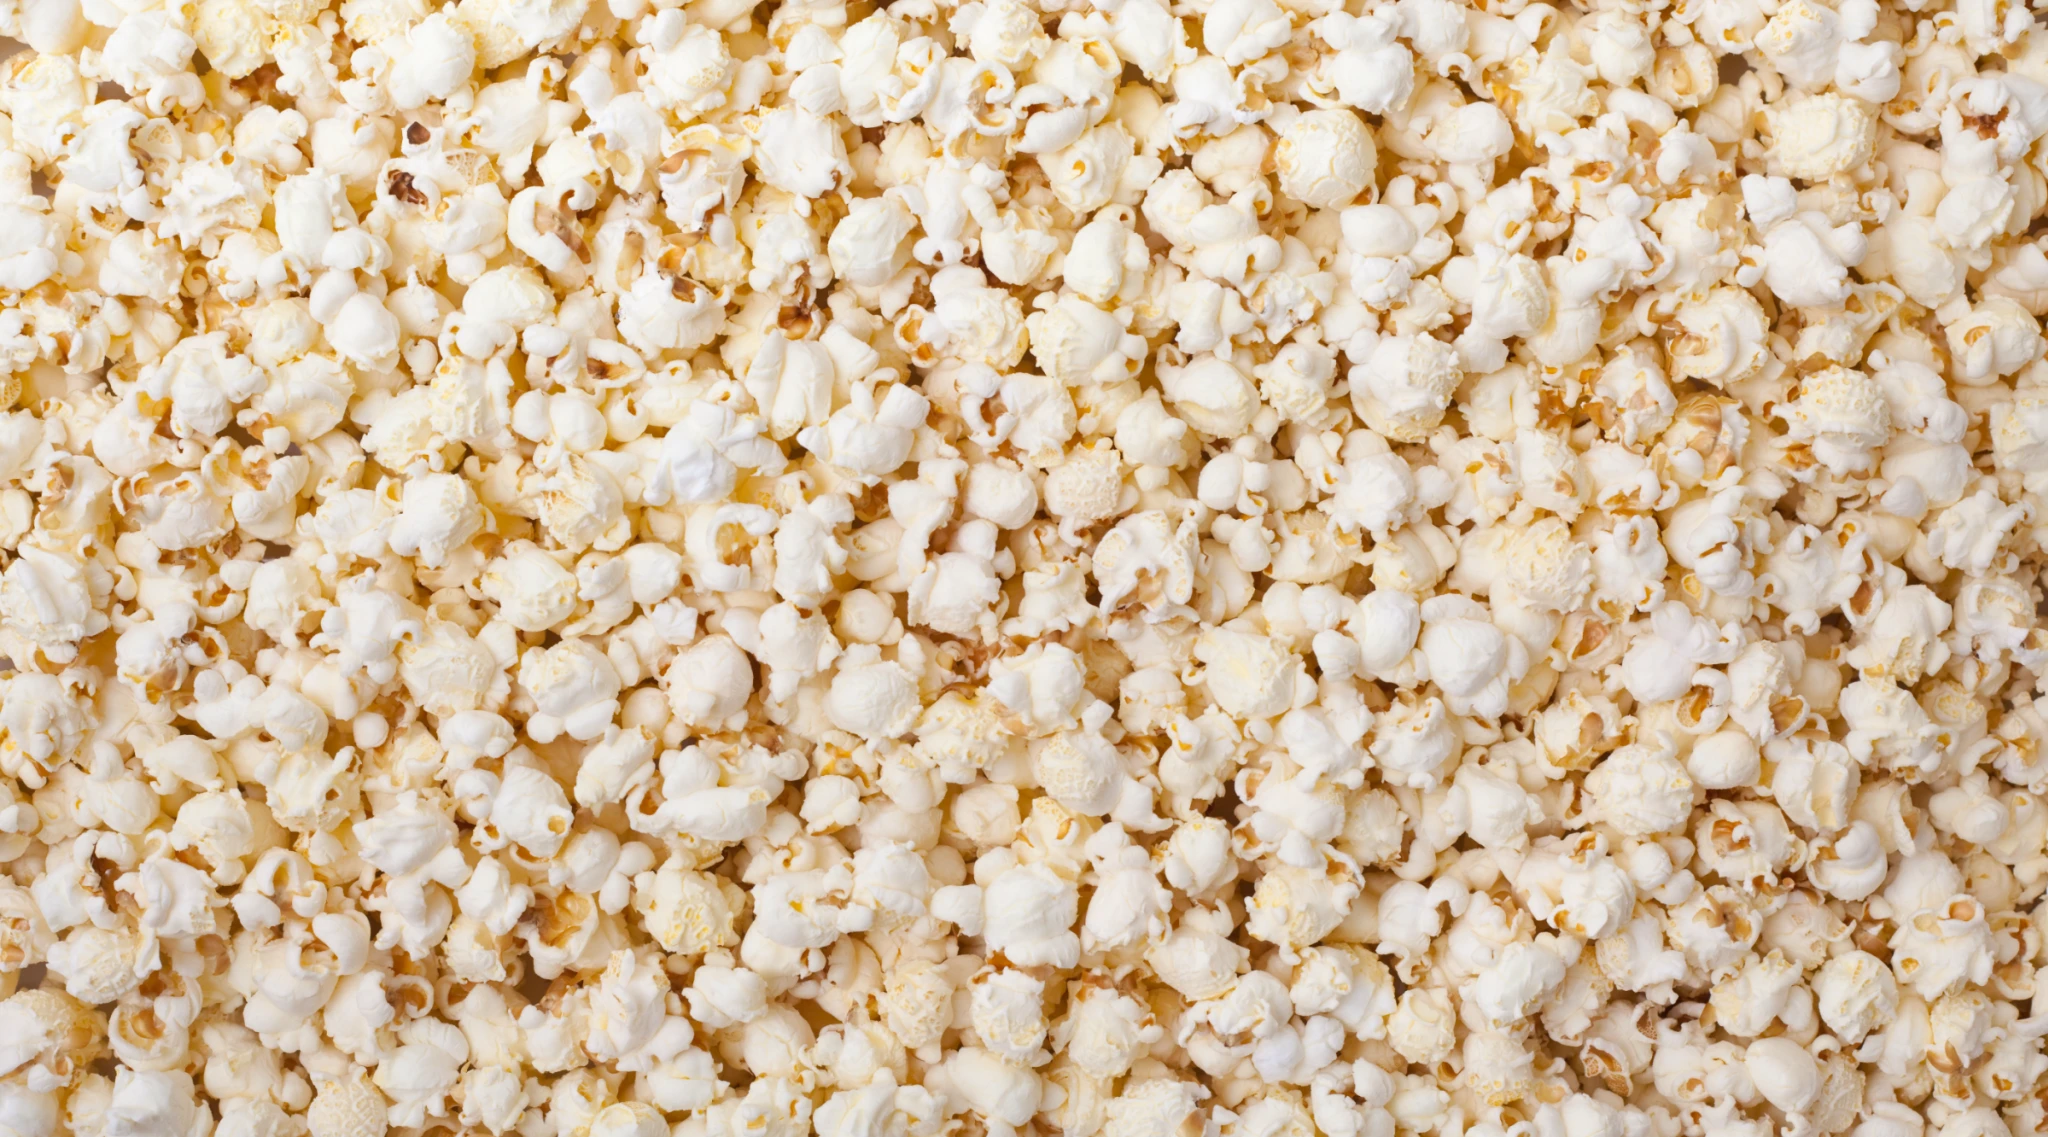 Celebrate National Popcorn Day With a Free Popcorn and Other Deals